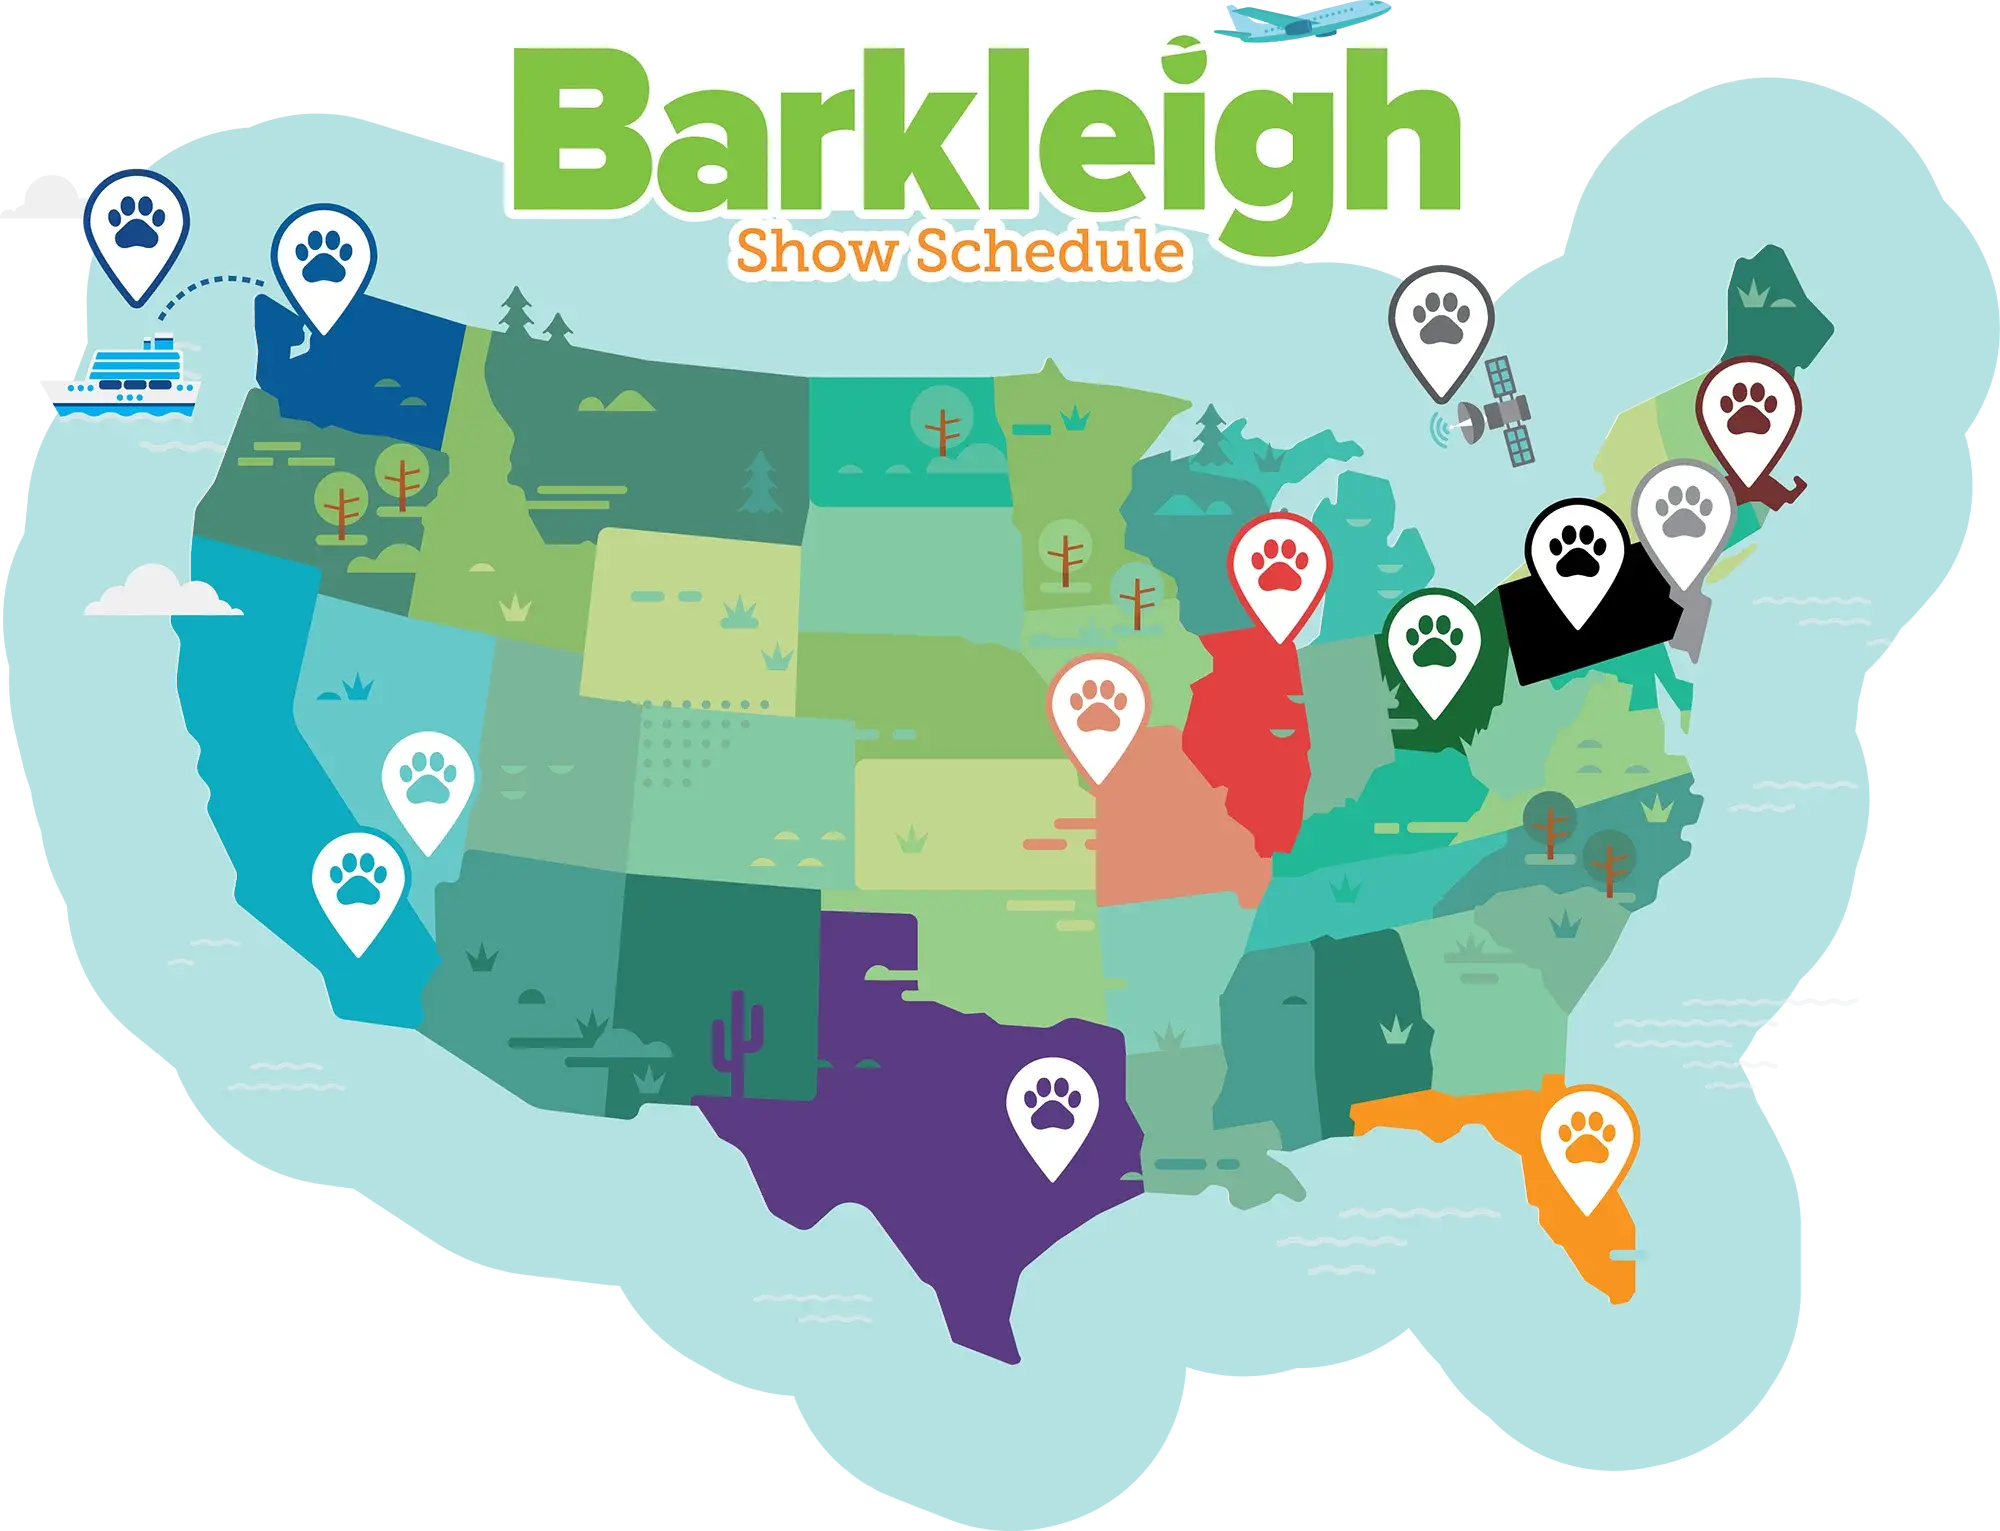 Barkleigh Show Schedule with colorful illustration of the United States of America map